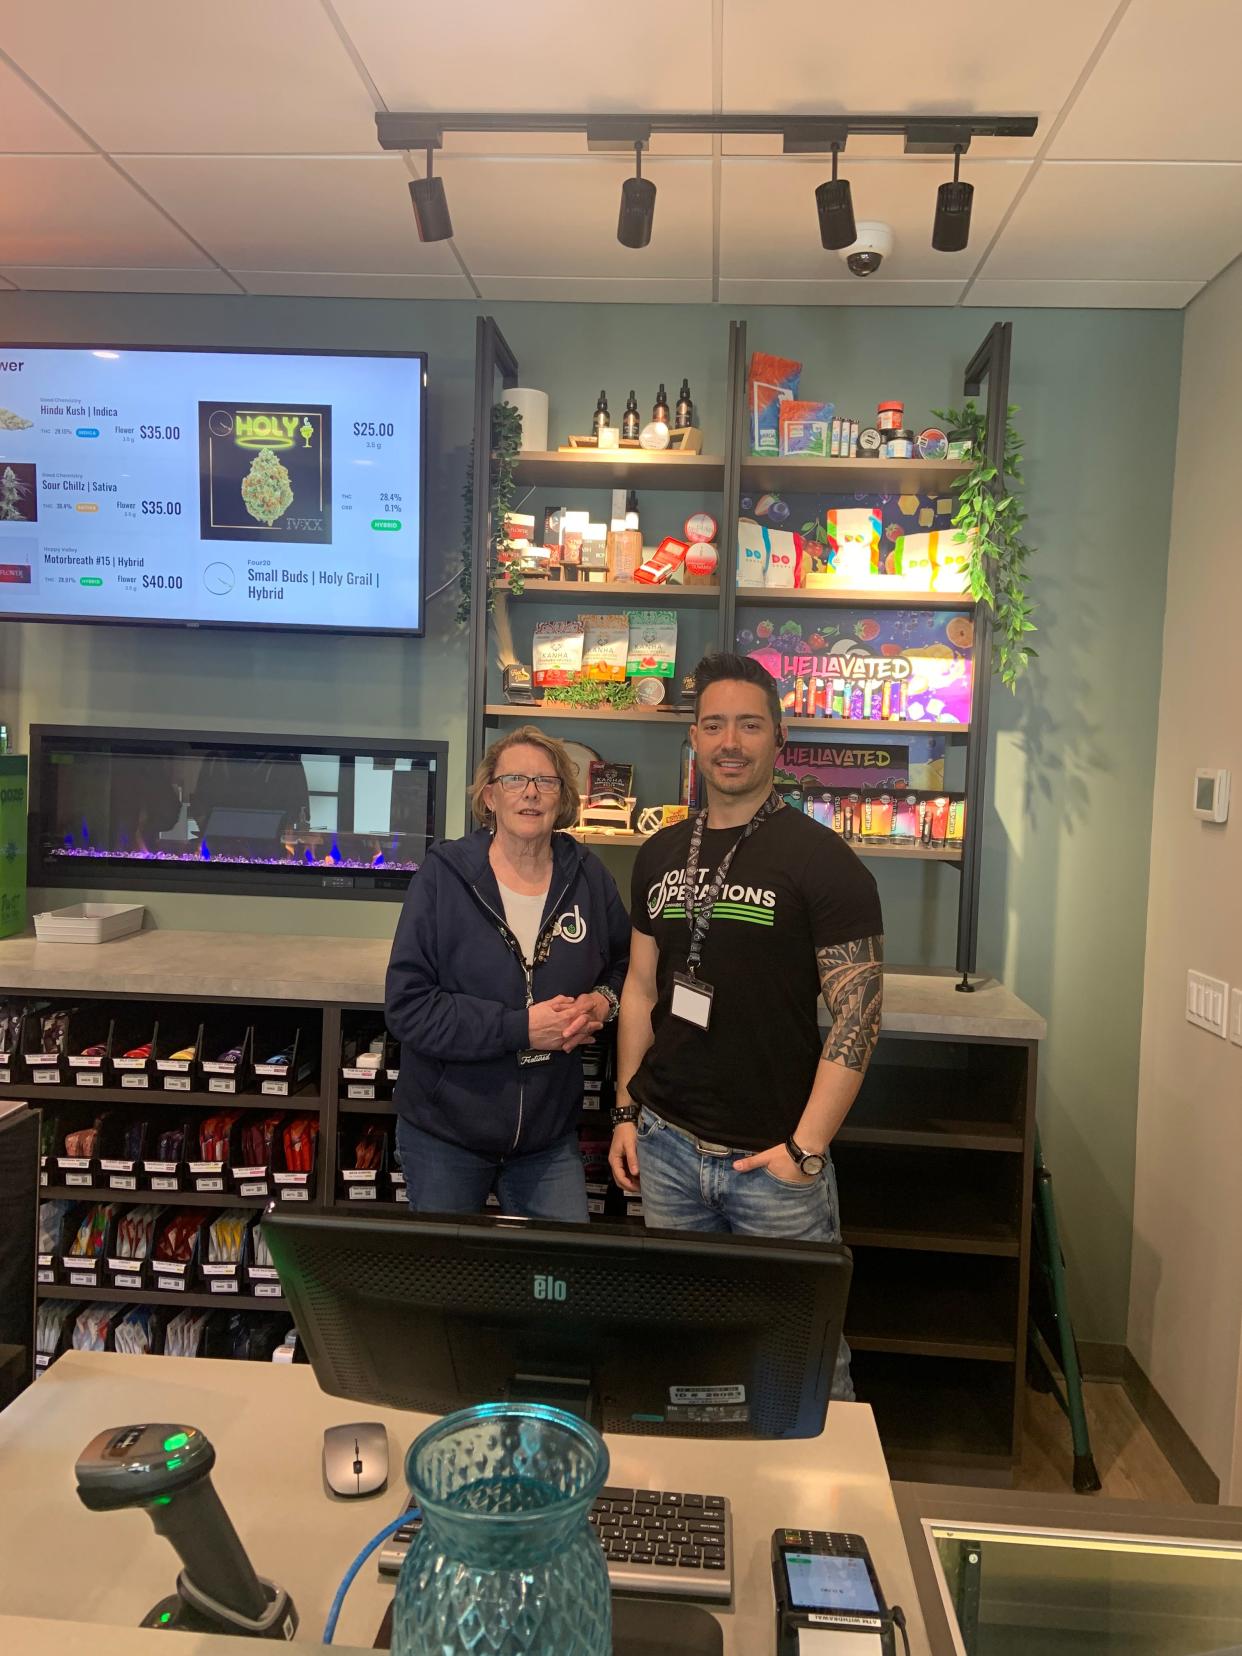 Susan Lee-Waite, a budtender, and Daniel Lencioni, district manager, welcome customers to the first day of operations at Joint Operations at Timpany Crossroads in Gardner. The city's second recreational marijuana dispensary opened on Sunday, 4/21.